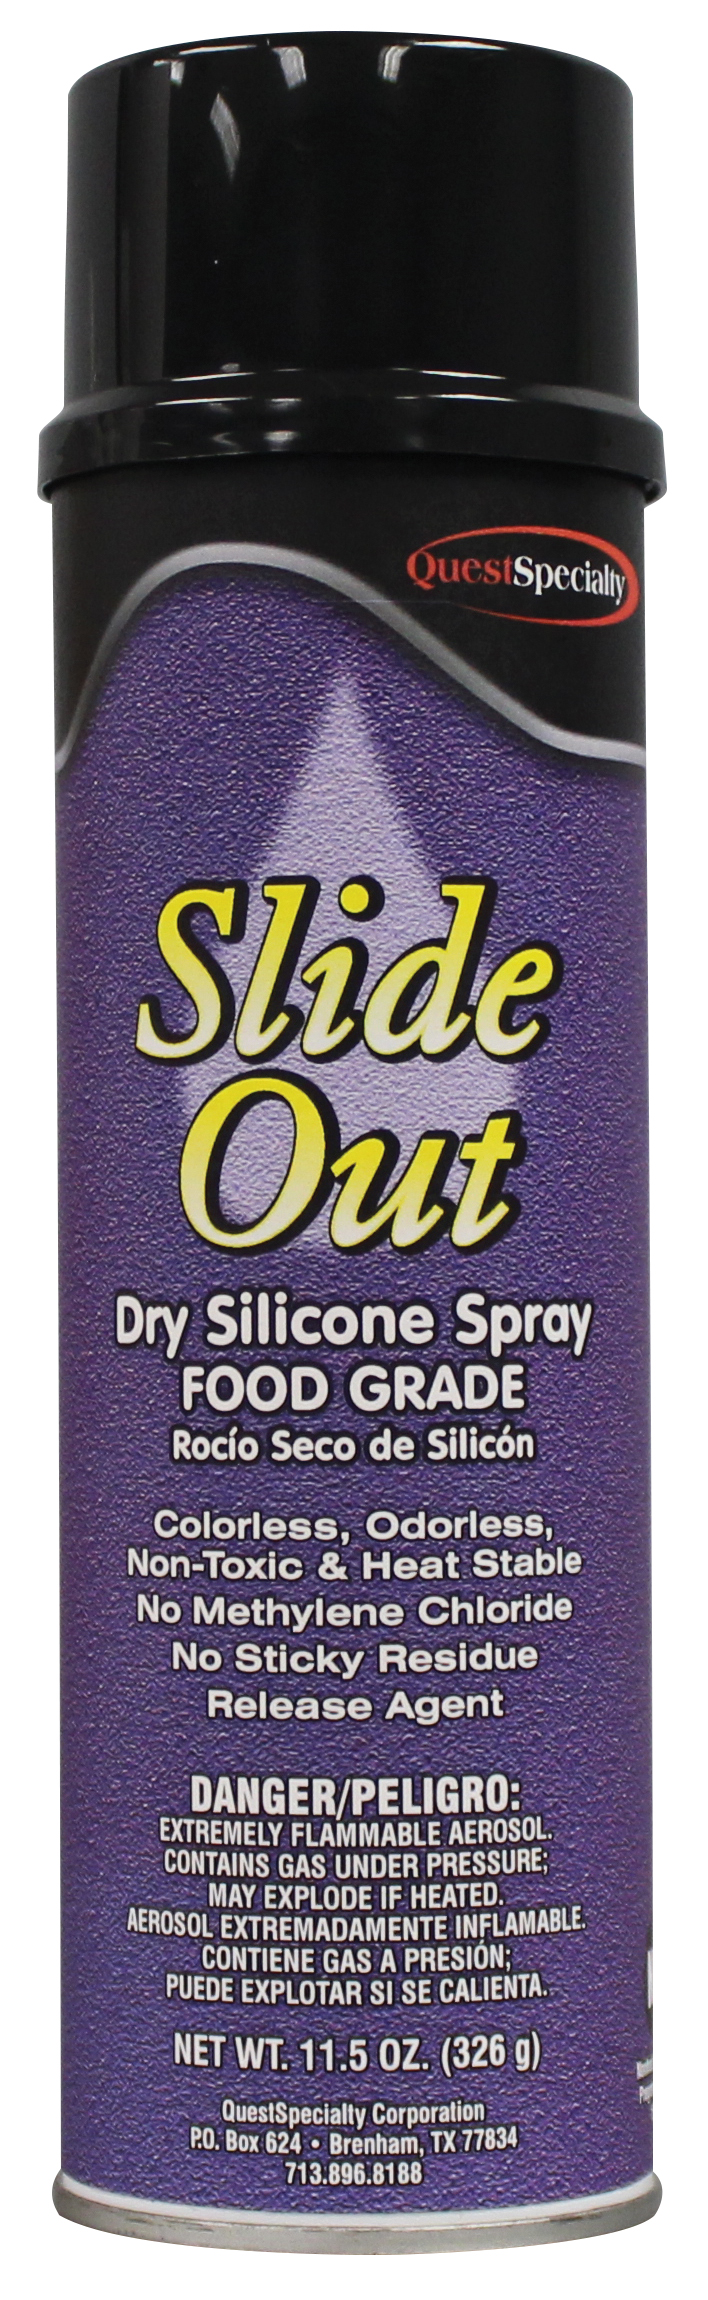 SLIDE OUT – Dry Silicone Spray Food Grade – Chem-Master